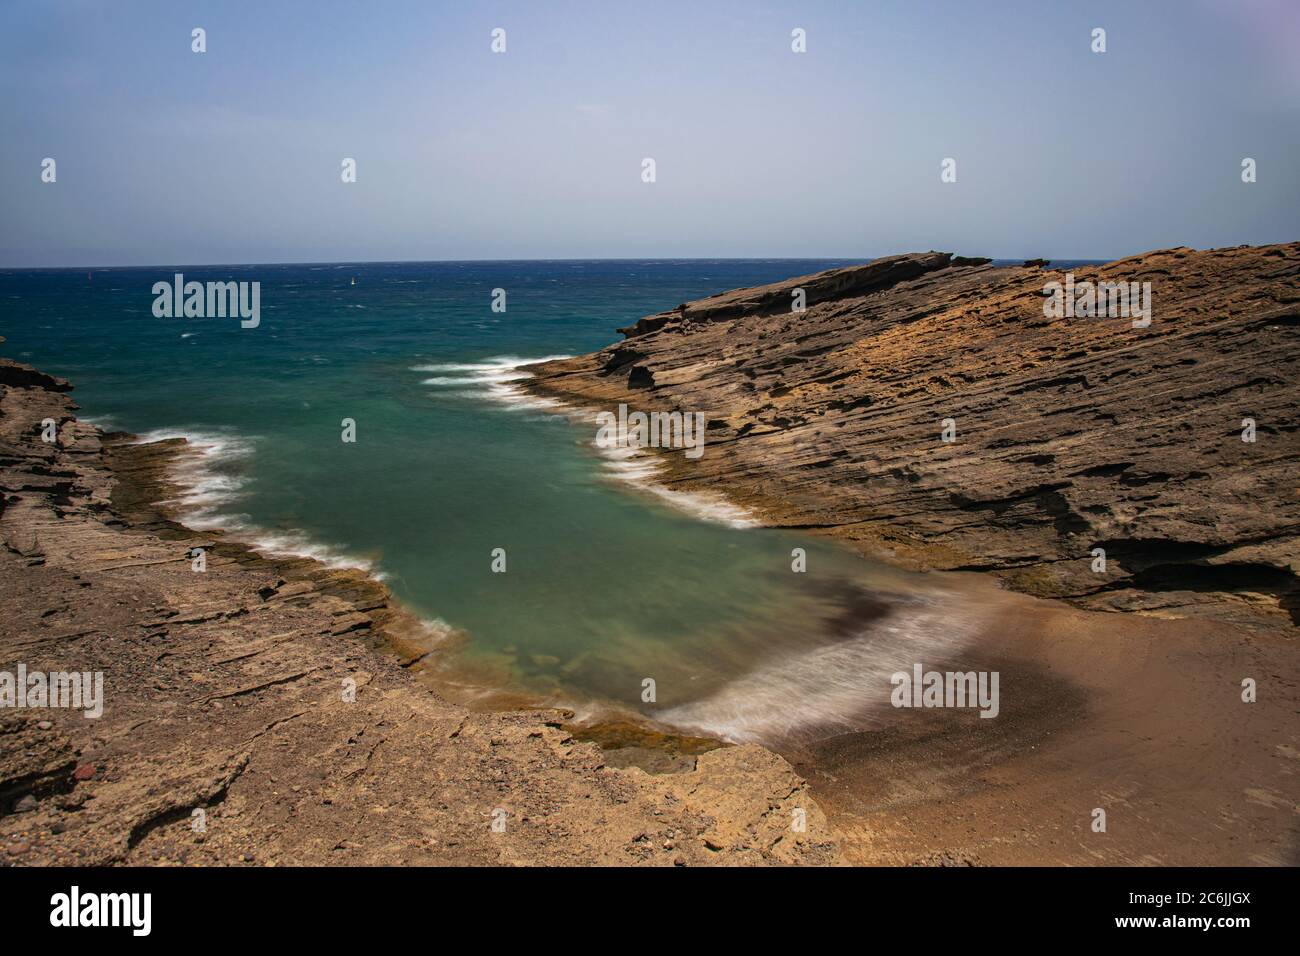 Secret beach in El Medano, long exposure, Volcanic rocks formation eroded by the wind and sea, Tenerife, Canary islands, Spain Stock Photo